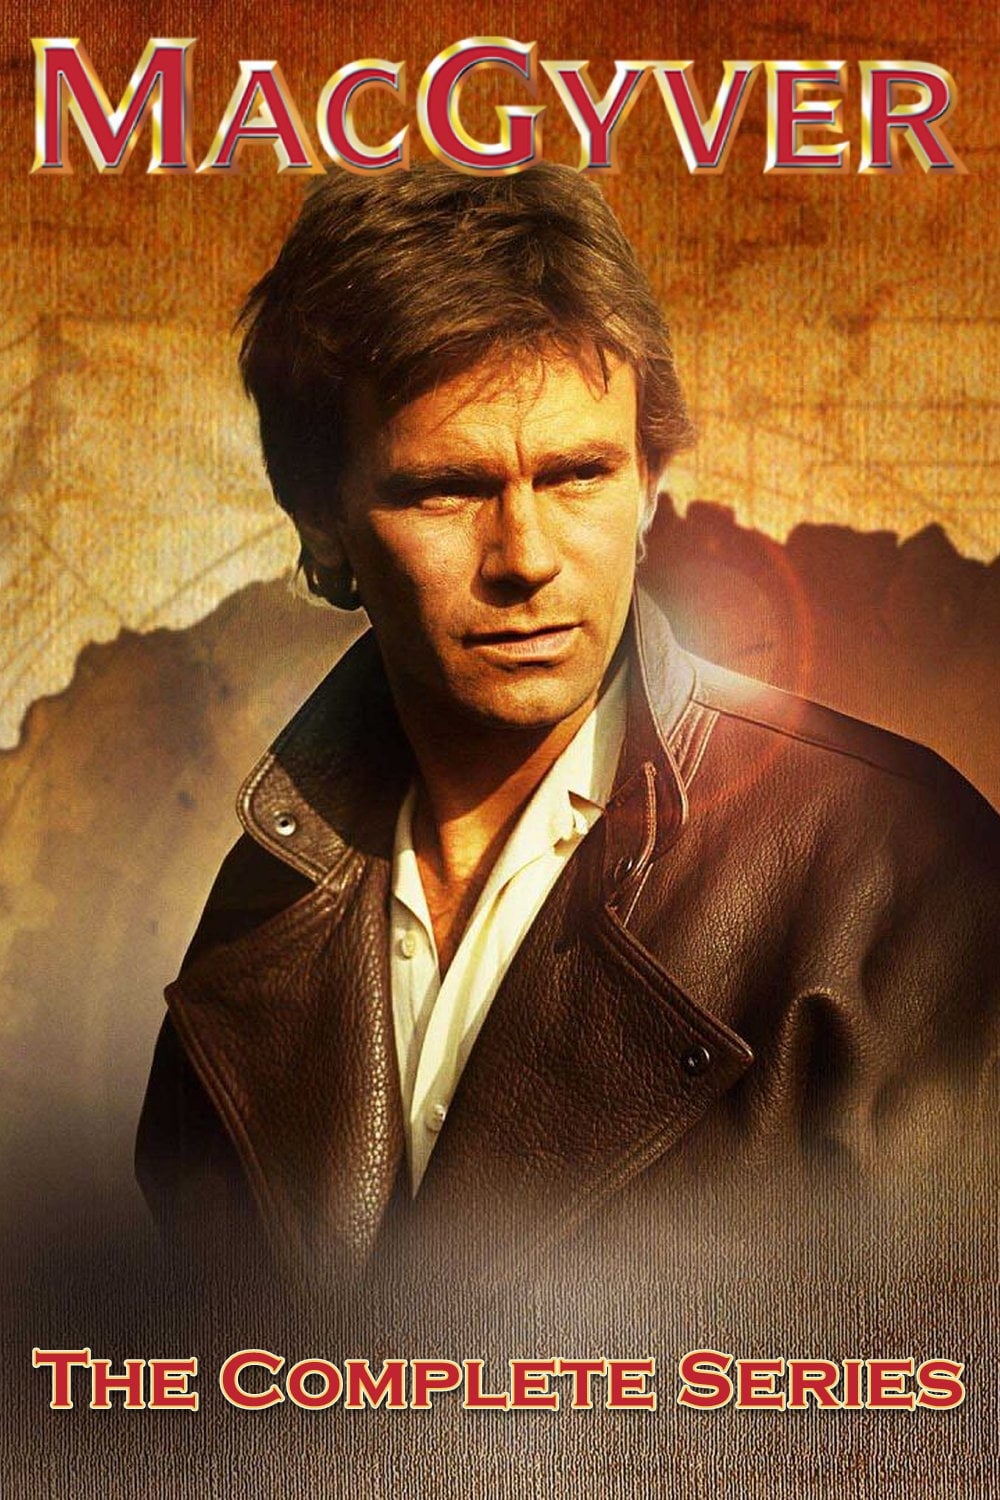 MacGyver TV Shows About Crime Fighter